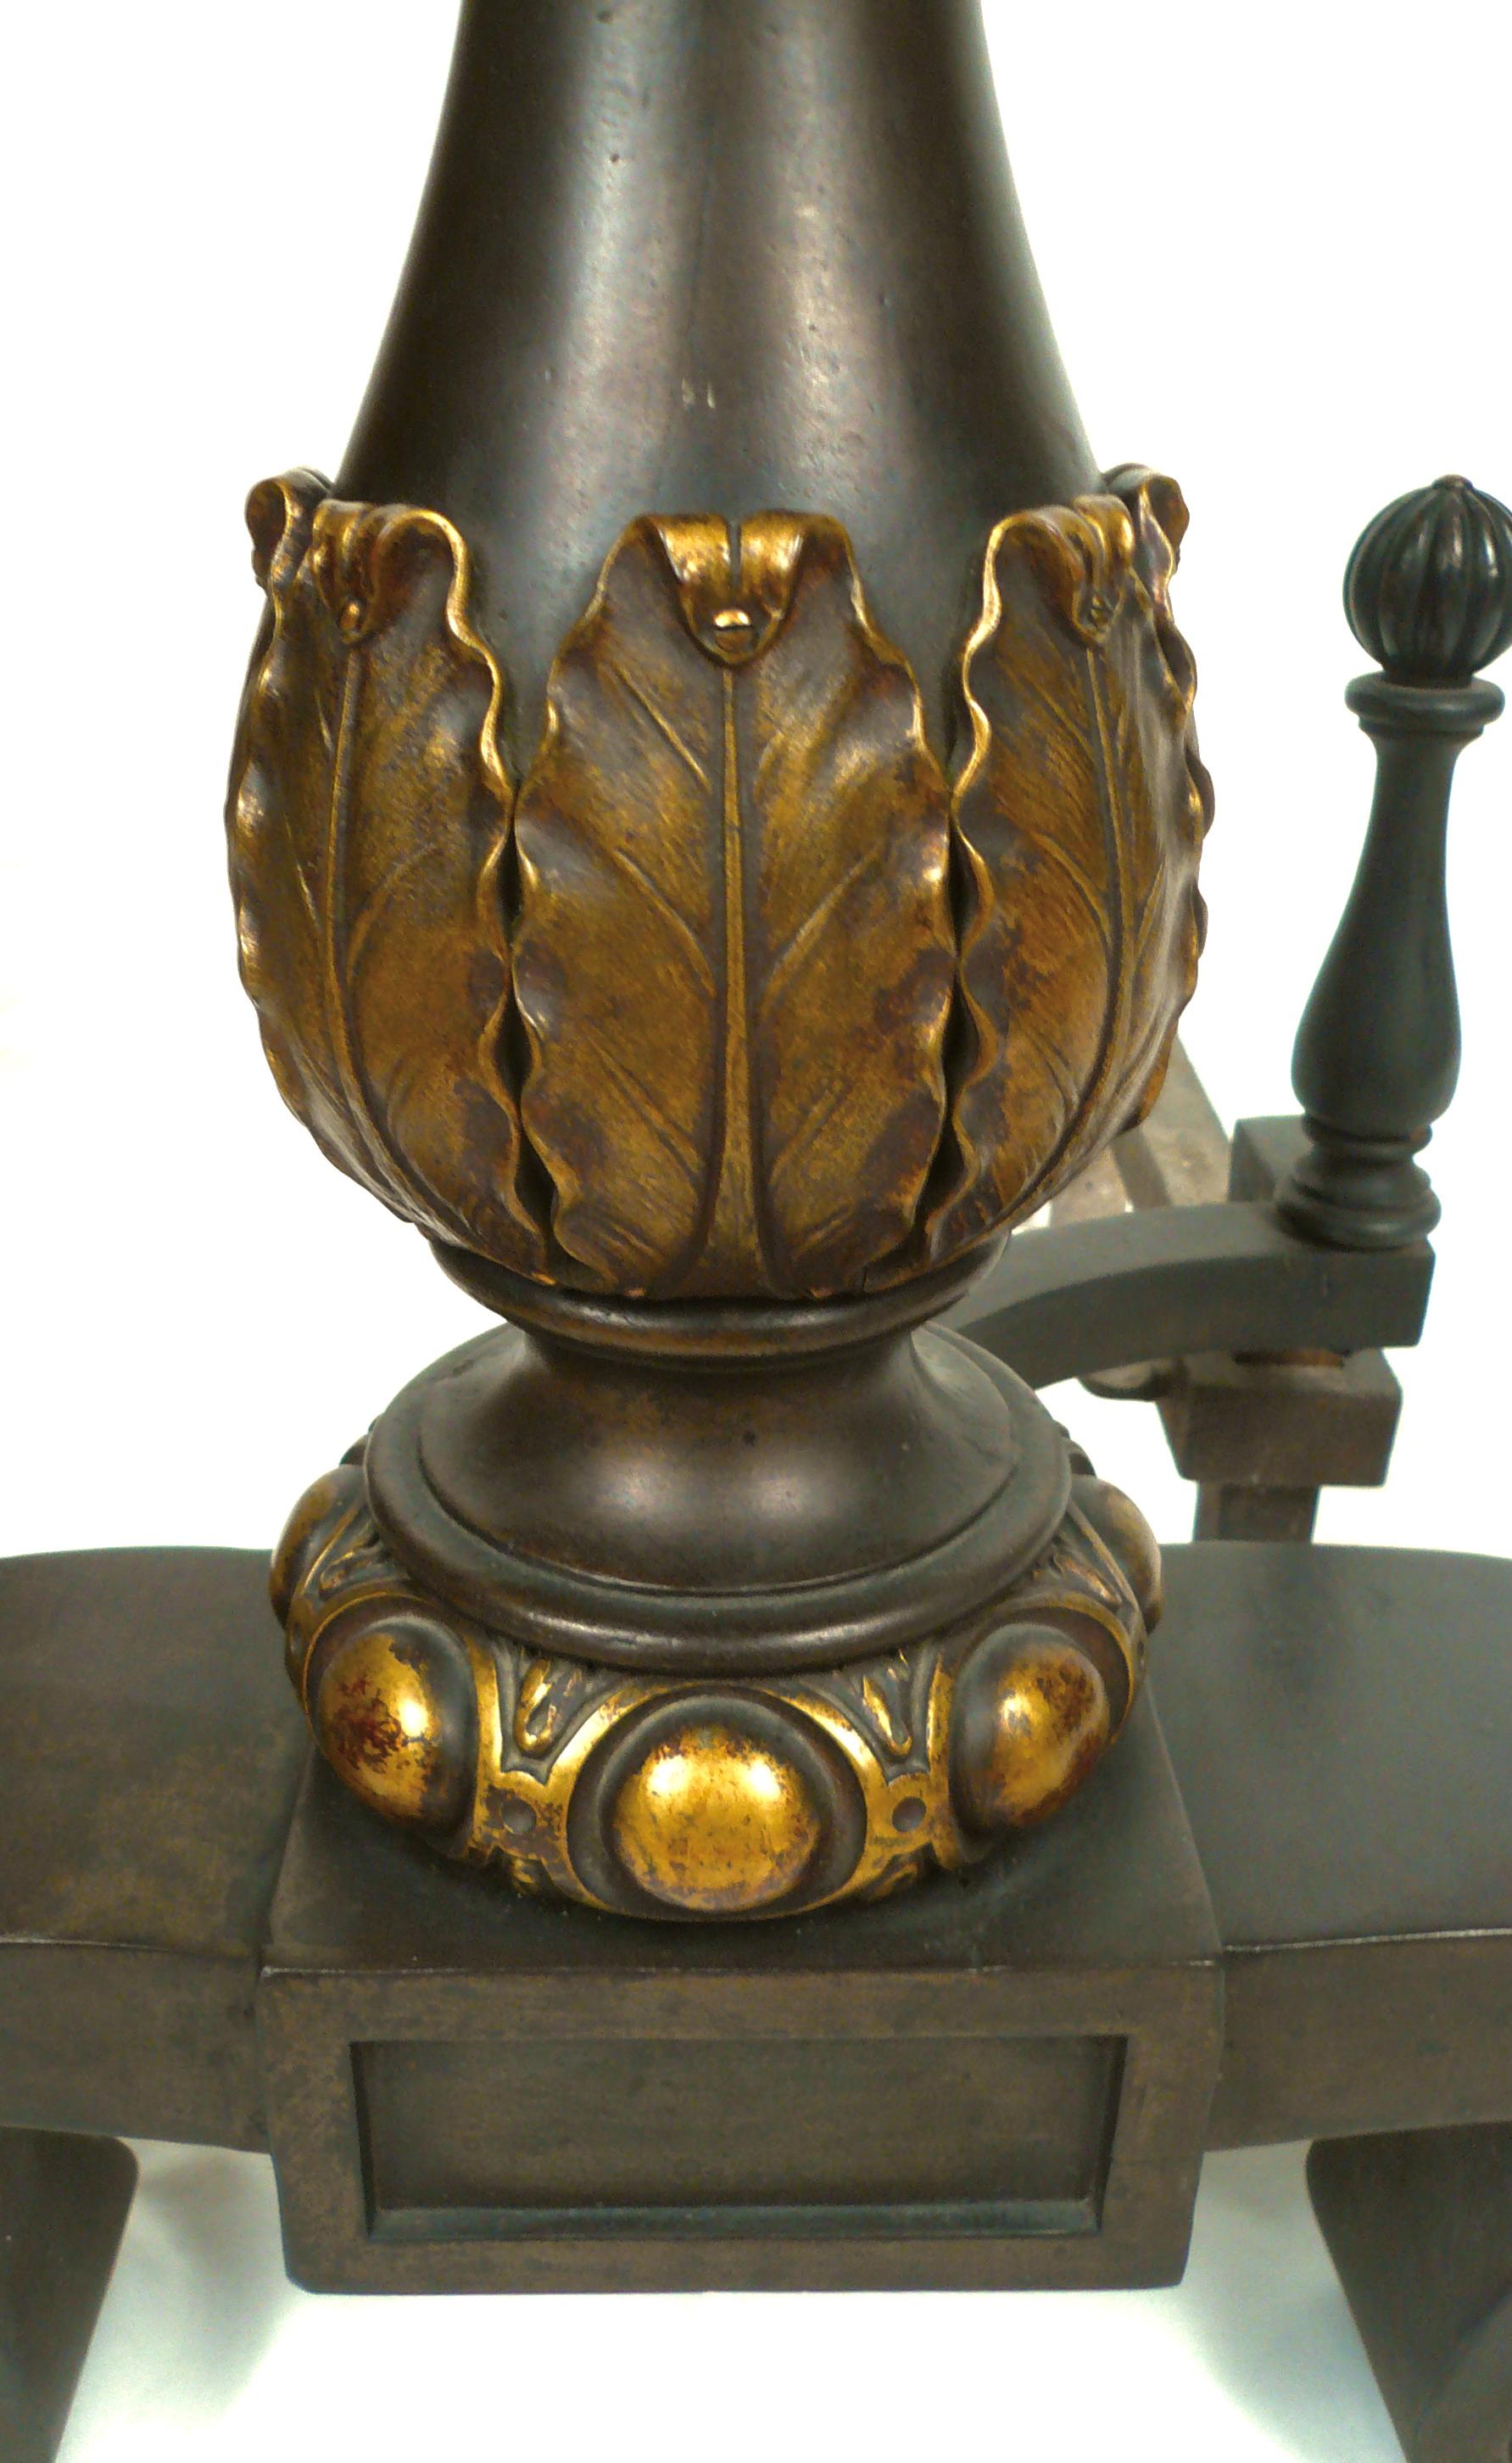 This pair of classic Georgian style andirons are baronial in scale, and feature baluster form uprights with egg and dart and acanthus leaf details.